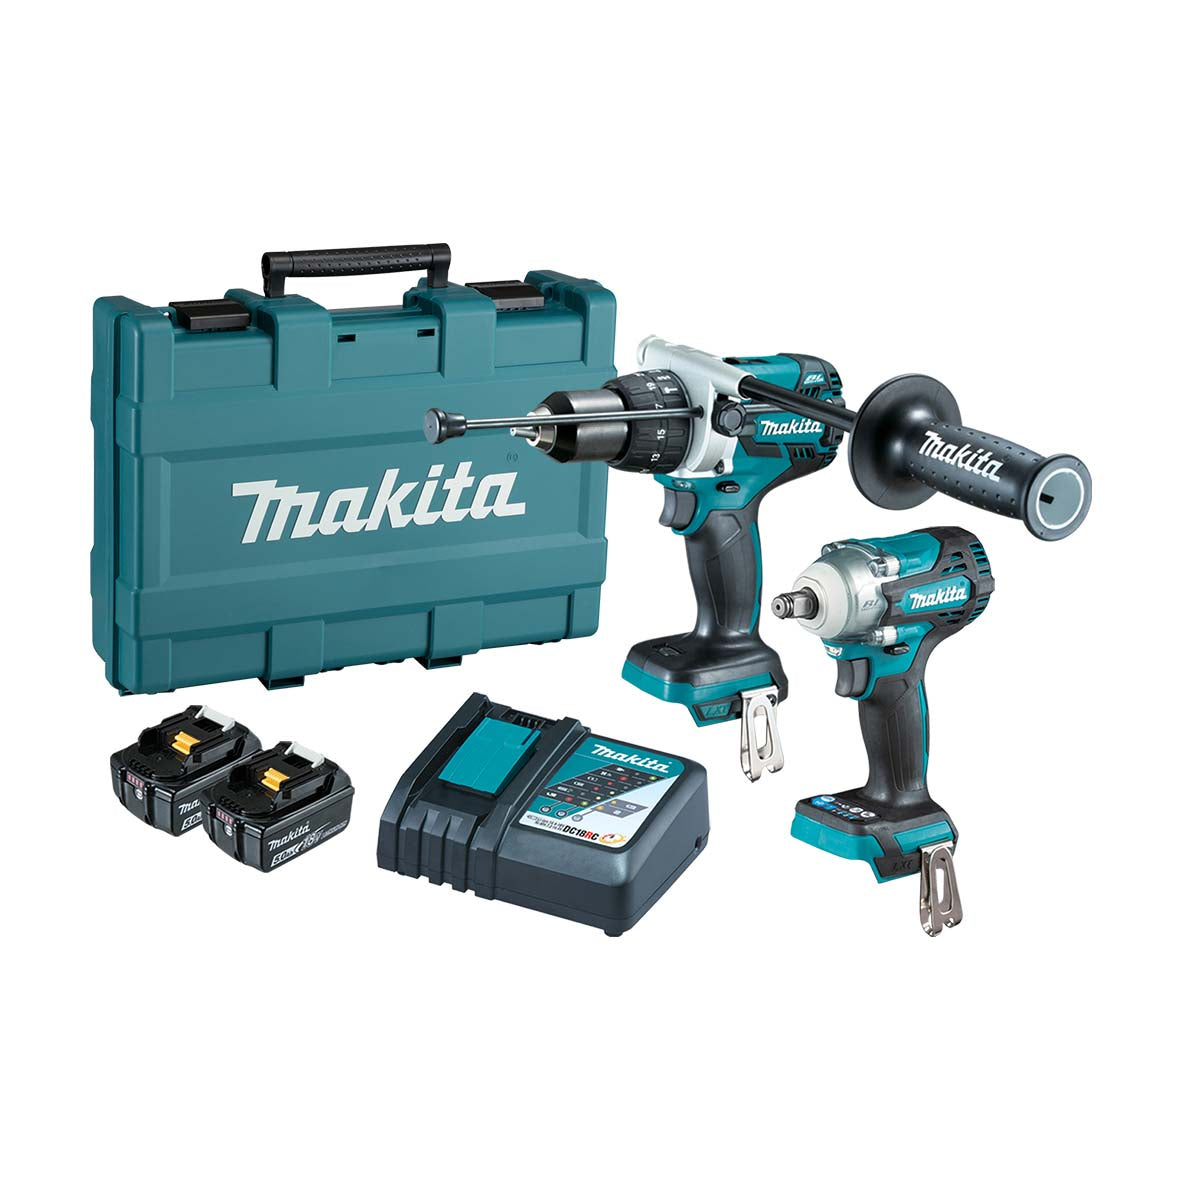 18V 5.0AH 2Pce Brushless Hammer Drill + Impact Wrench Kit DLX2370T by Makita